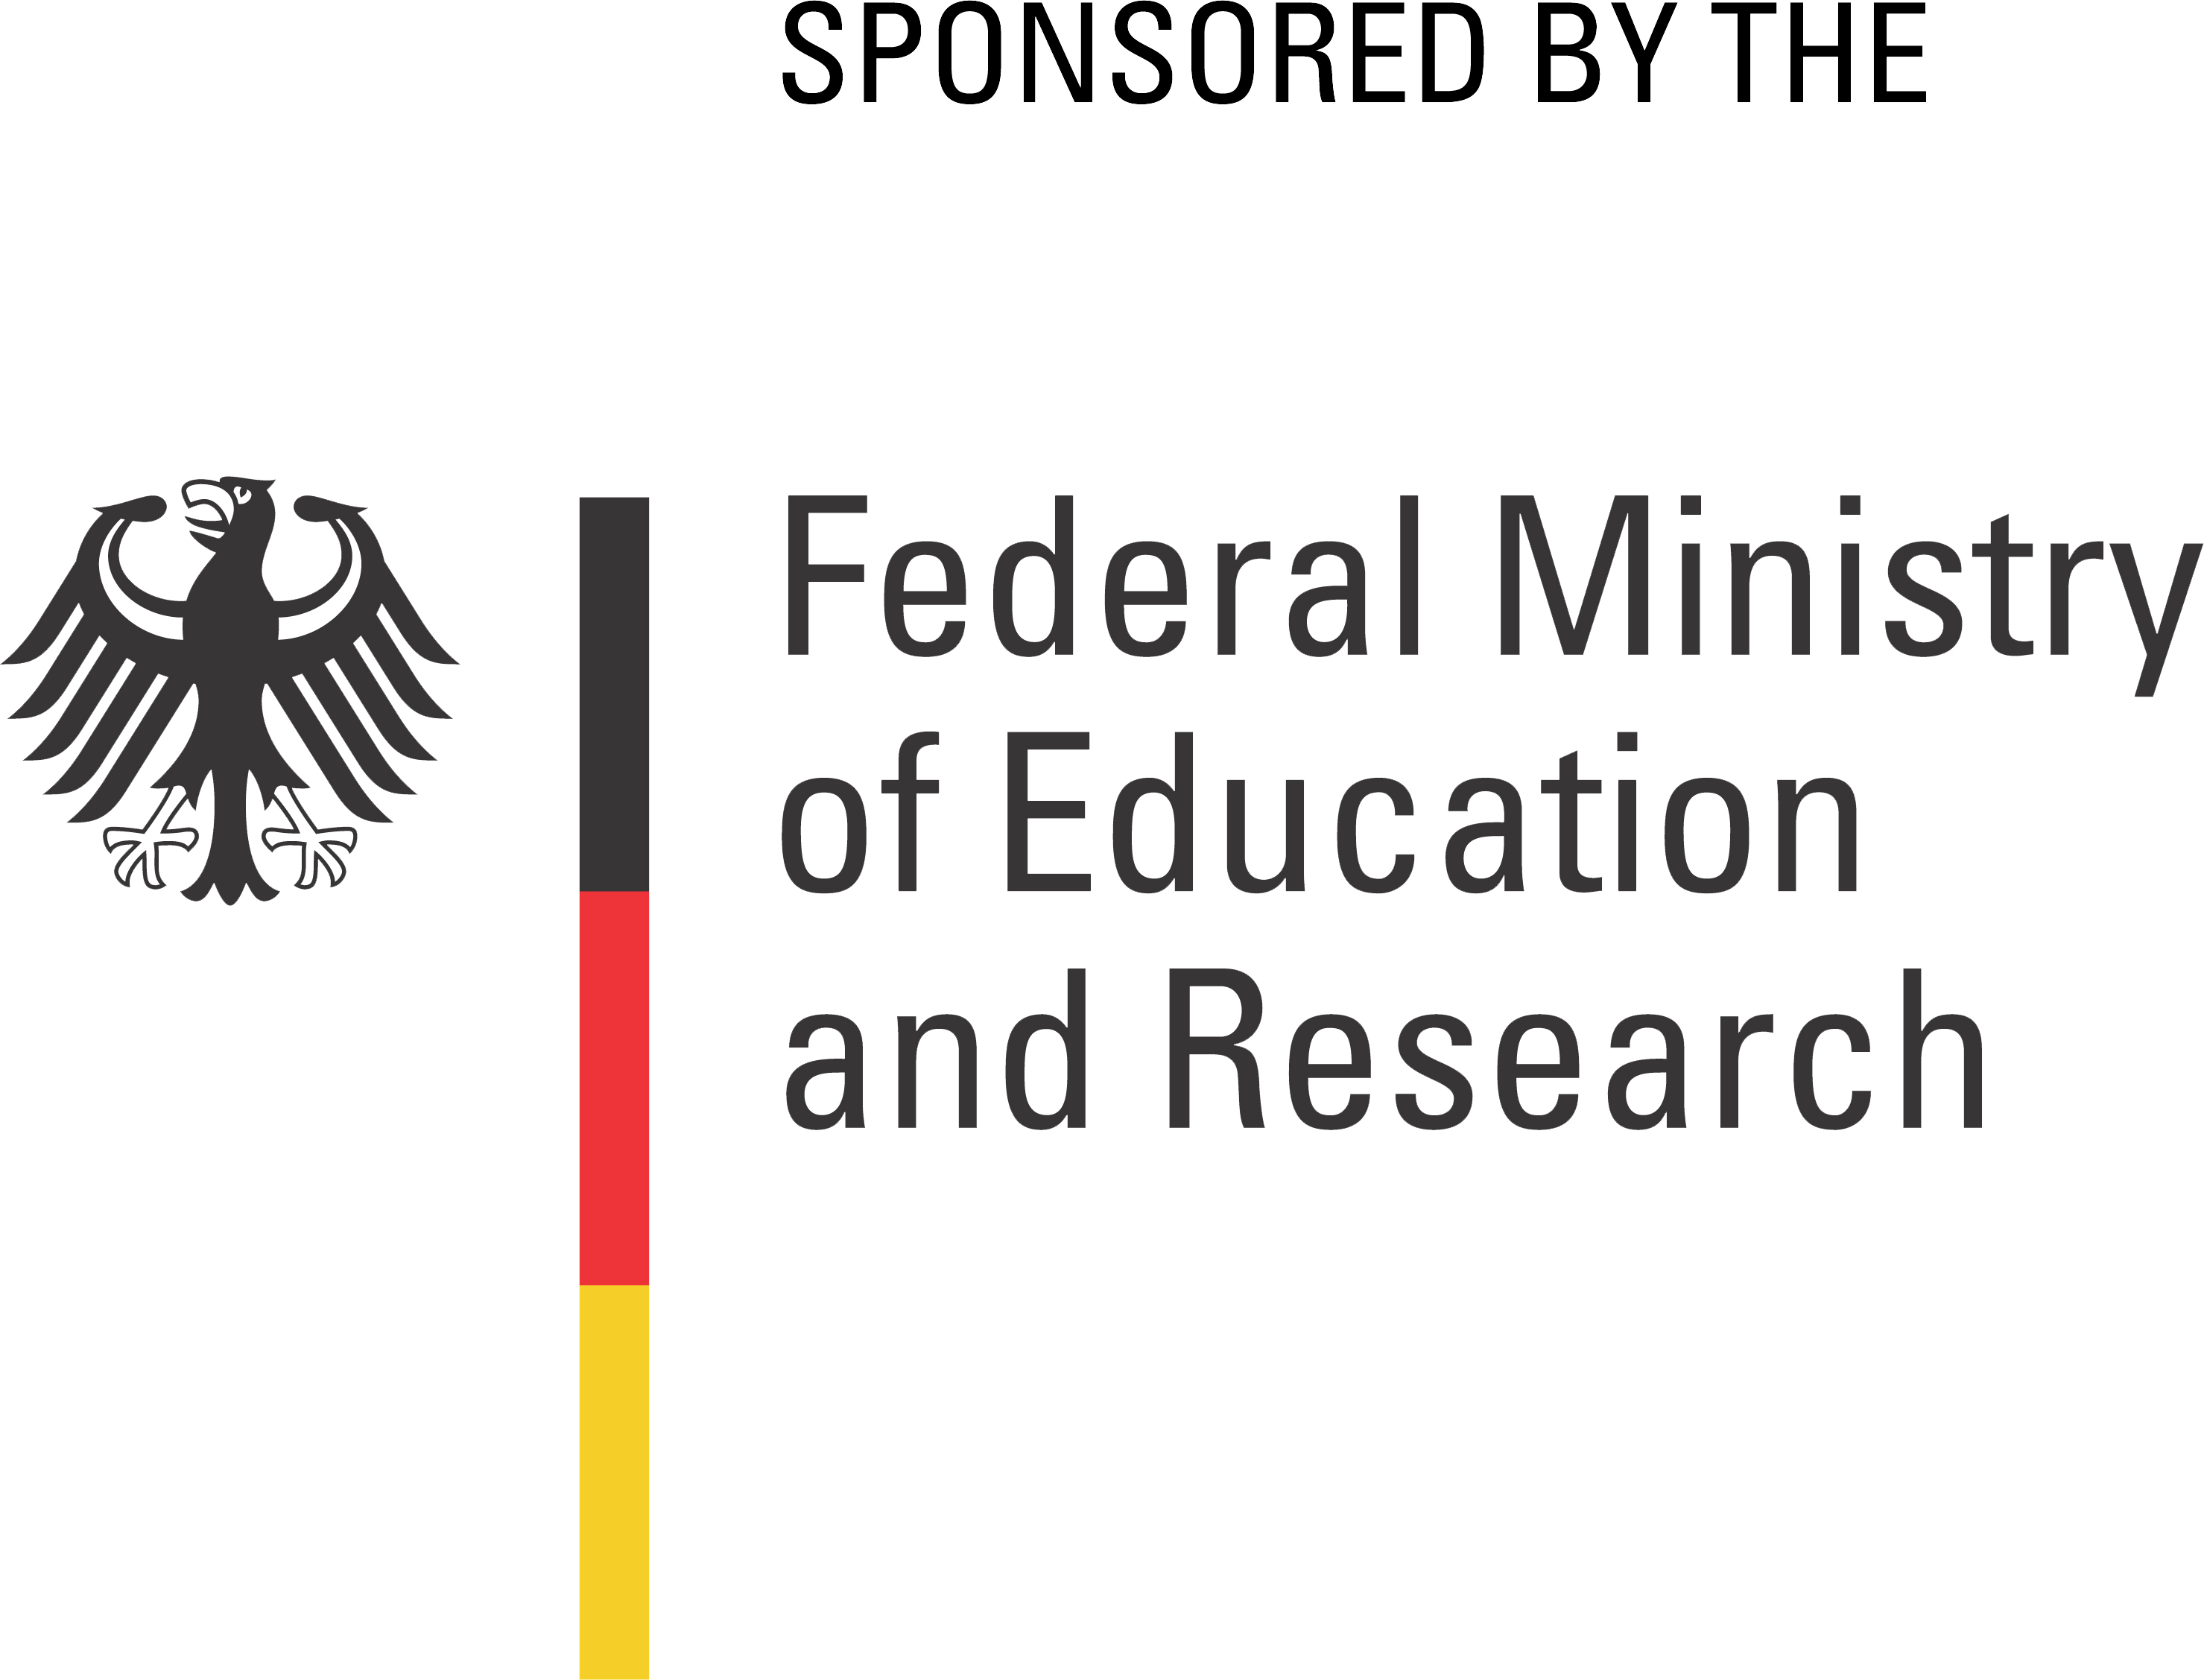 Federal Ministry of Education and Research